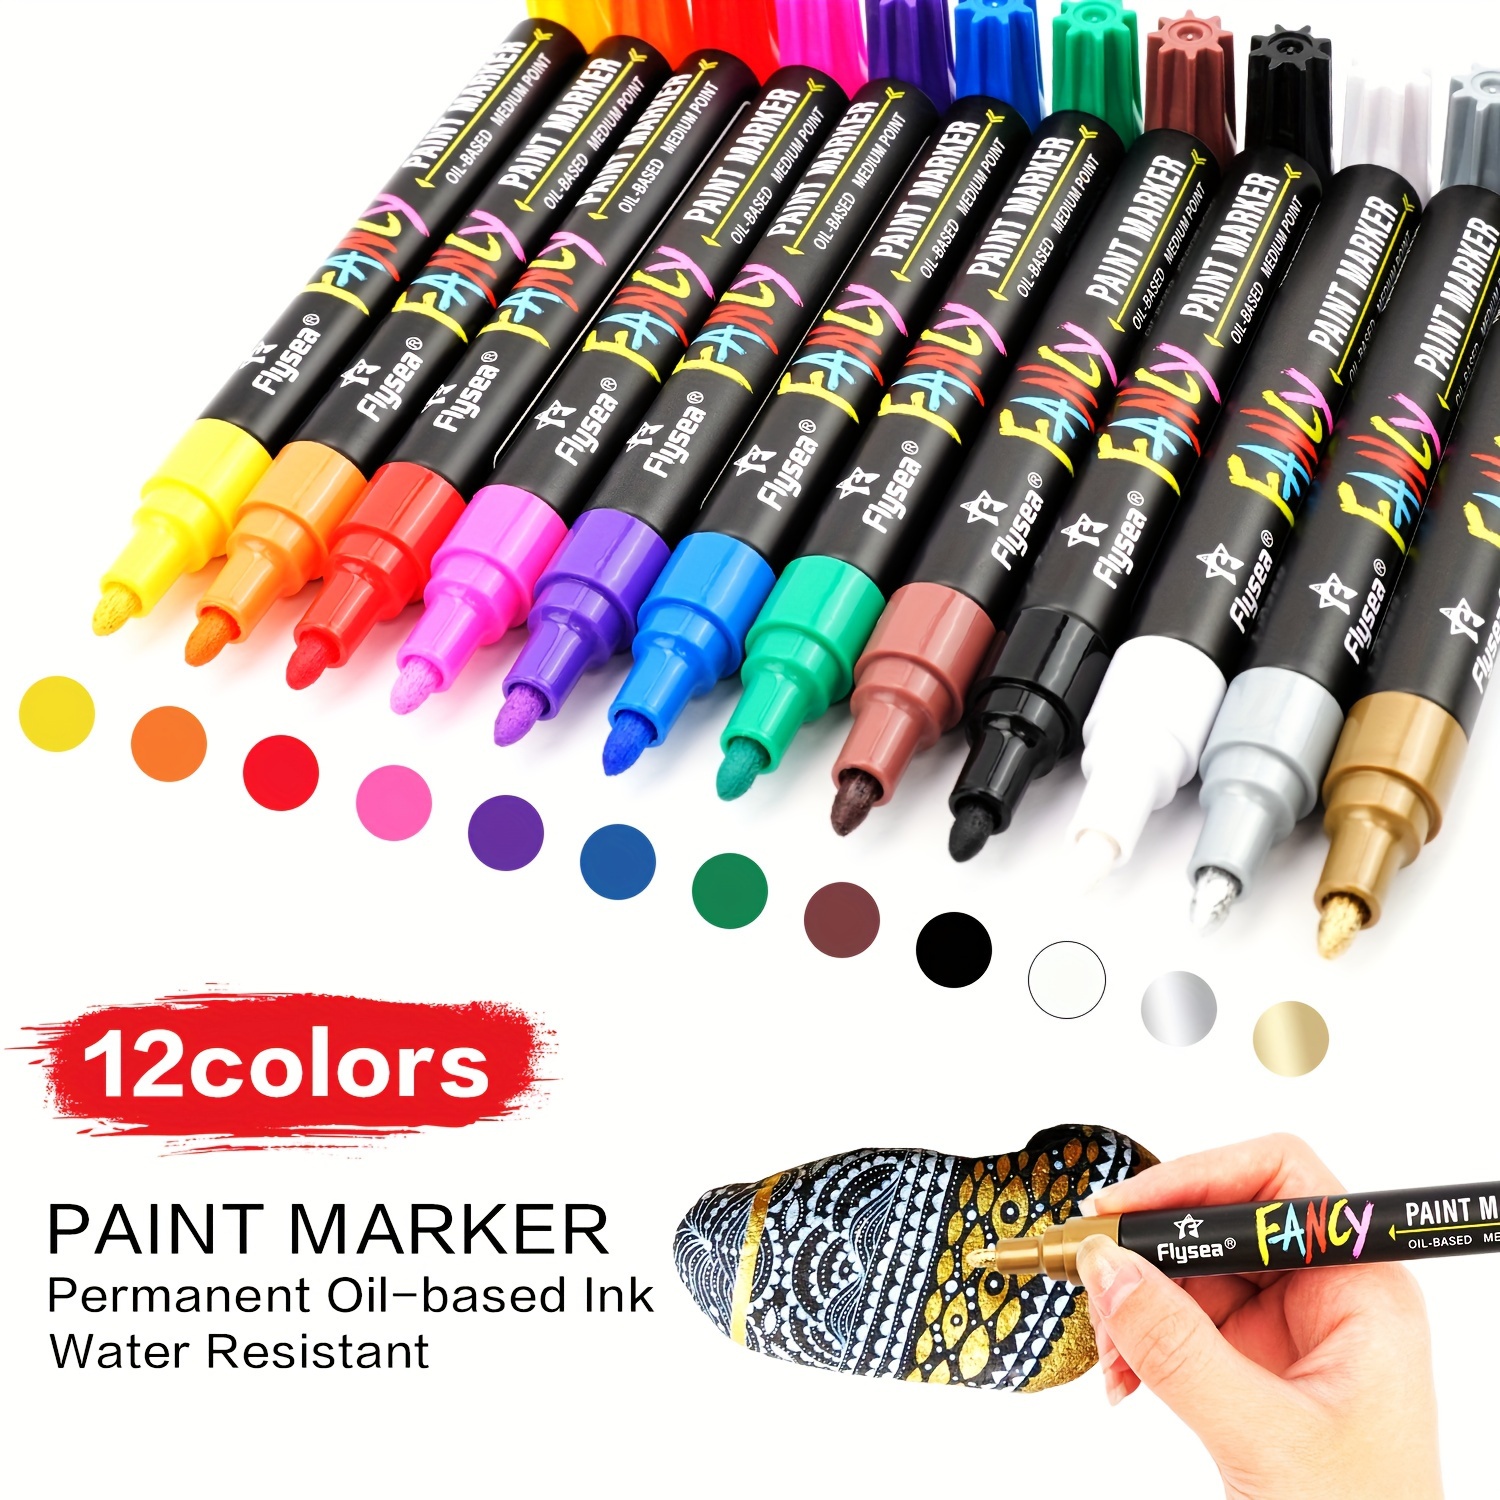 ZEYAR Oil-Based Paint Markers for Rock Painting, Medium Point, Waterproof Ink, 18 Colors, AP Certified, Great on Mug, Rock, Glass, Canvas, Metal and M